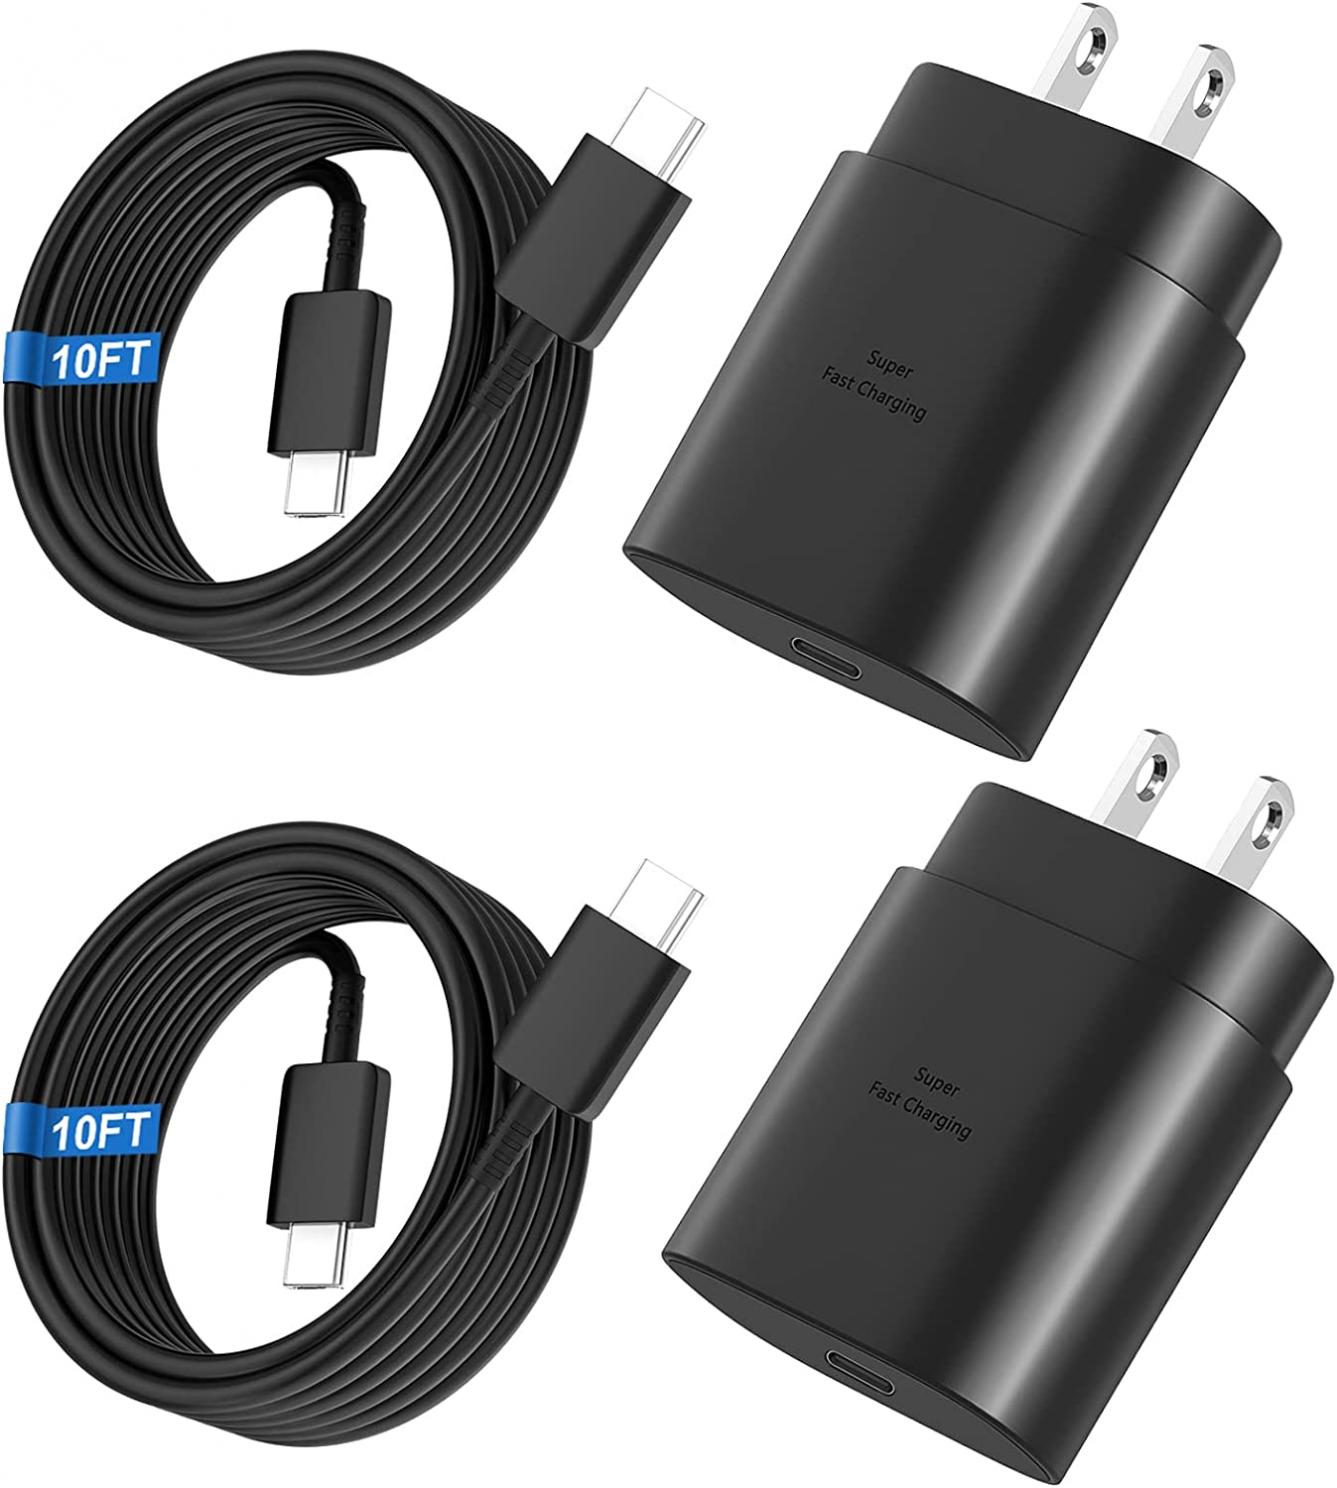 Super Fast Charger Type C, 25W USB C Wall Charger Fast Charging for Samsung Galaxy S22/S22 Ultra/S22+/S21/S21 Ultra/S21+/S20/S20 Ultra/Note 20 Ultra/Note 10/Z Fold 3 with 10FT C Charger Cable 2Pack